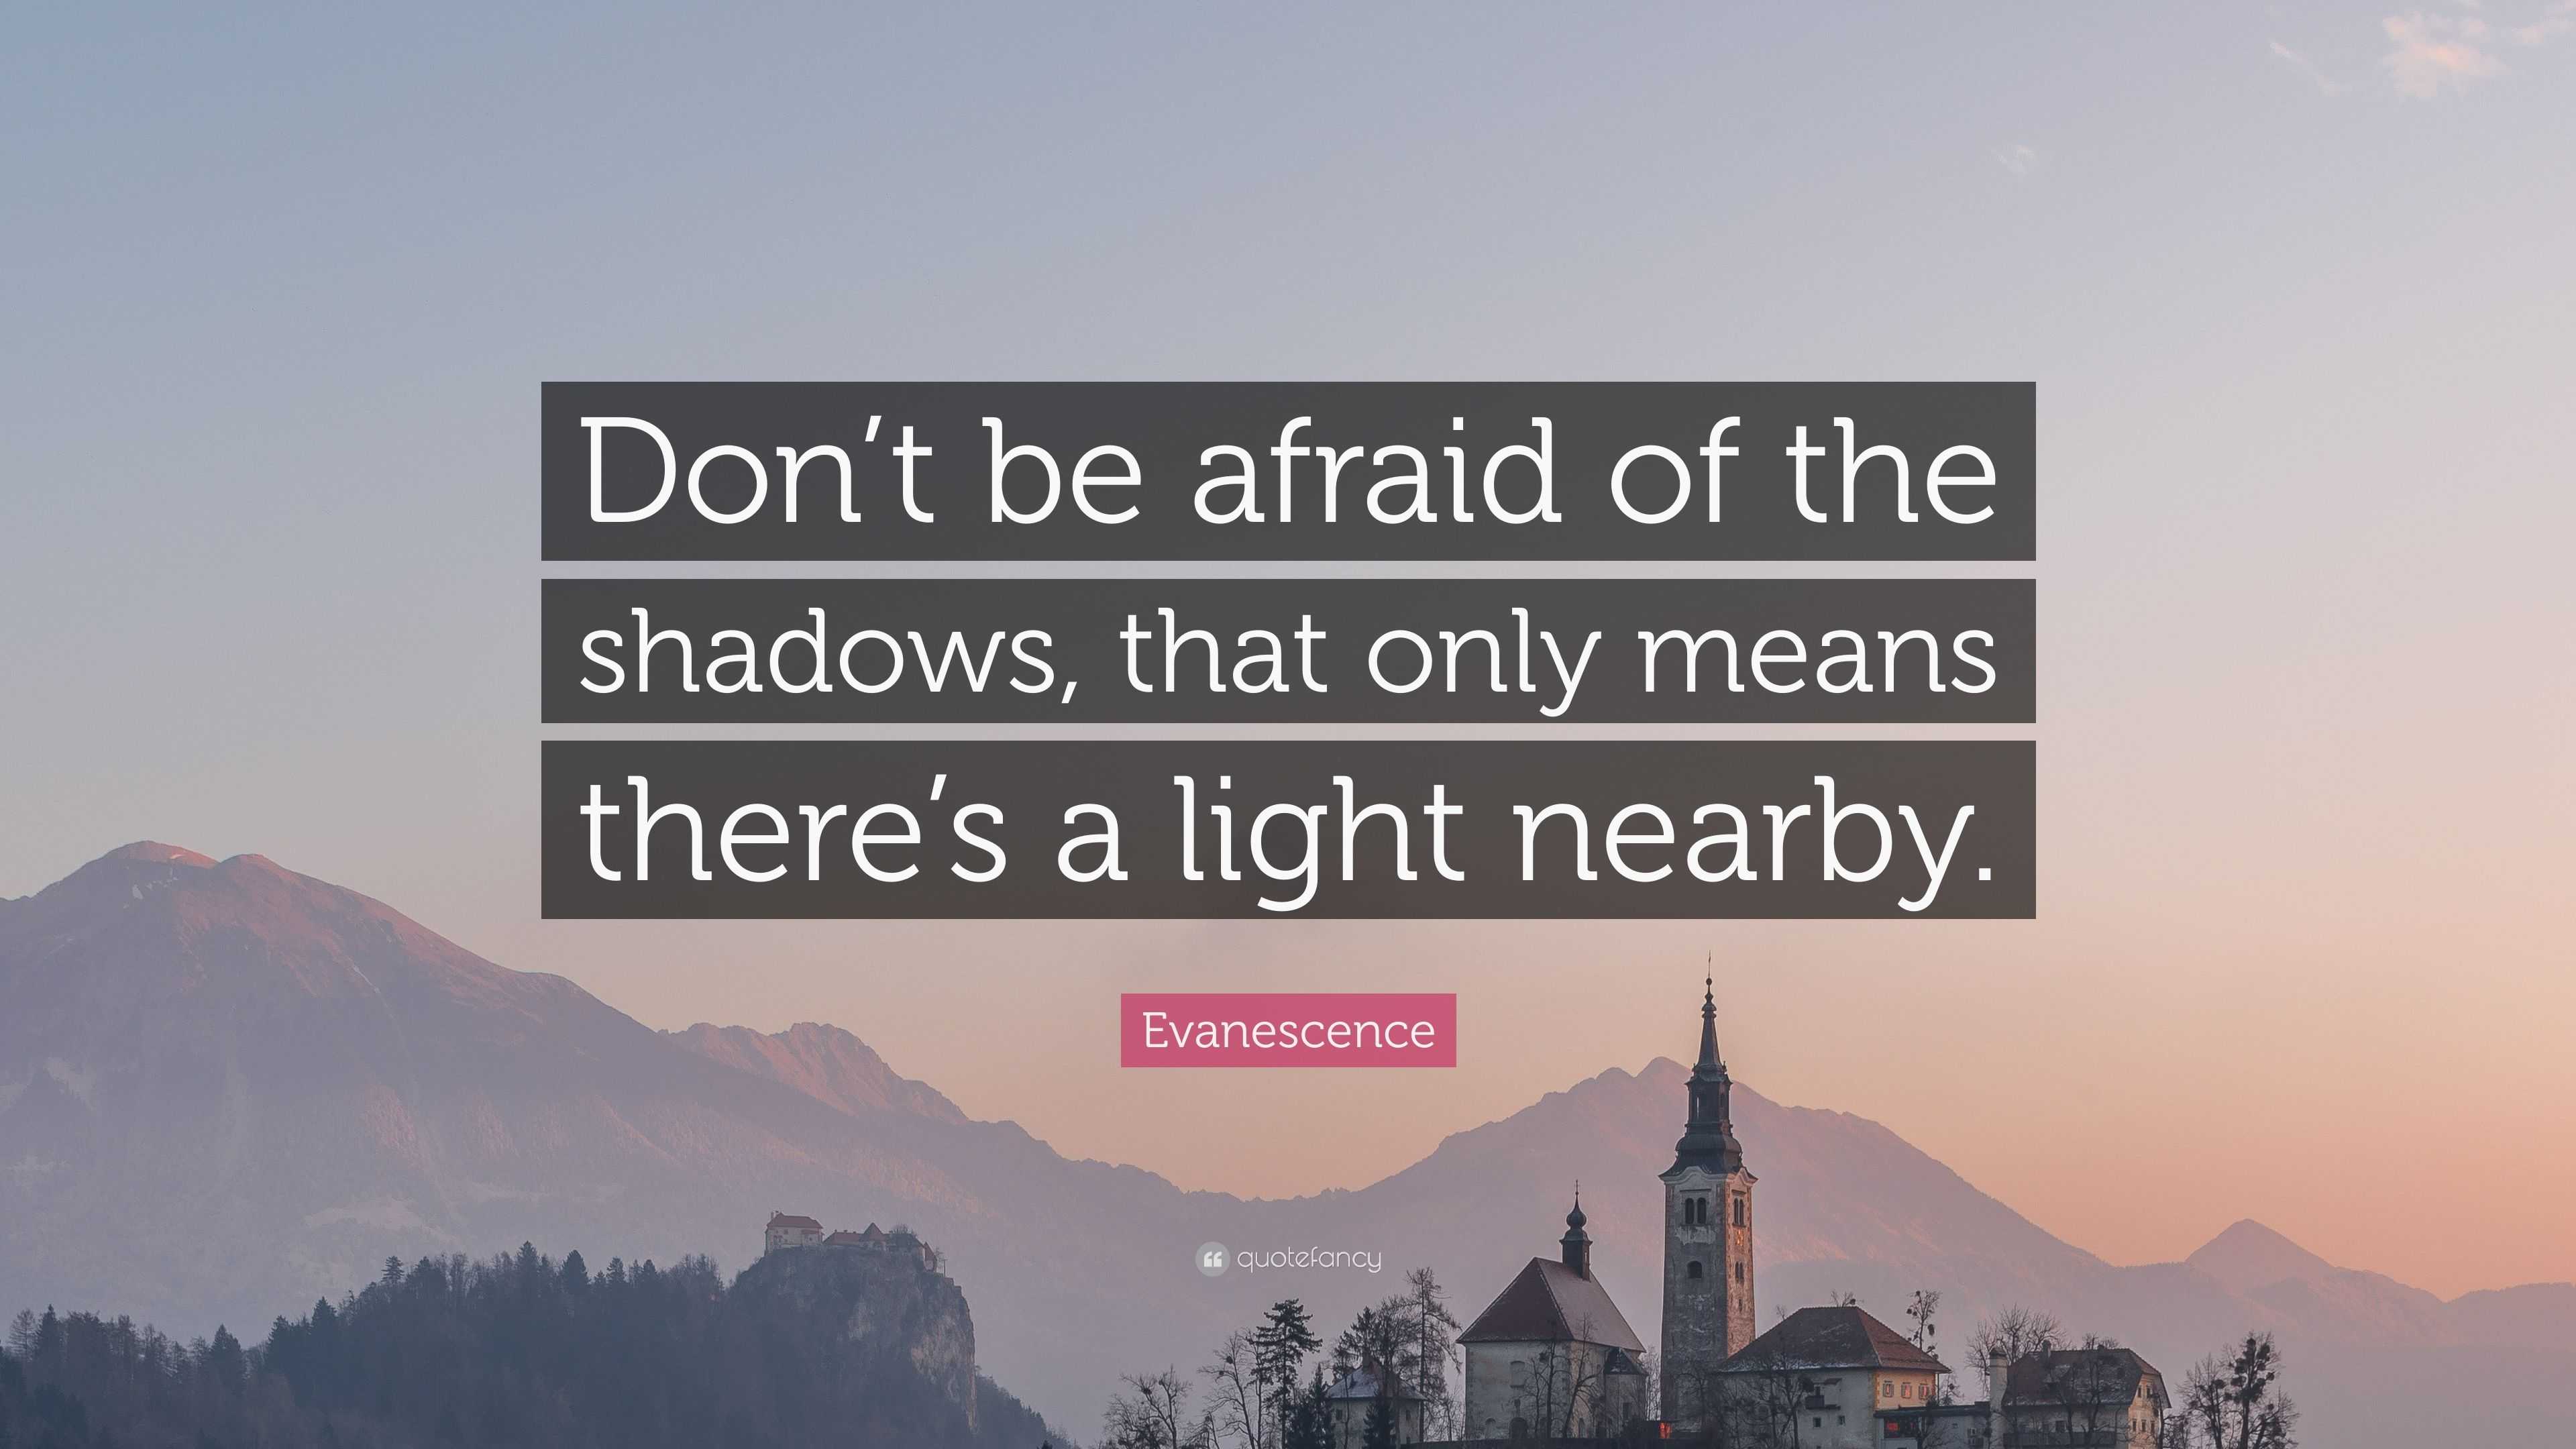 Evanescence Quote: “Don’t be afraid of the shadows, that only means ...